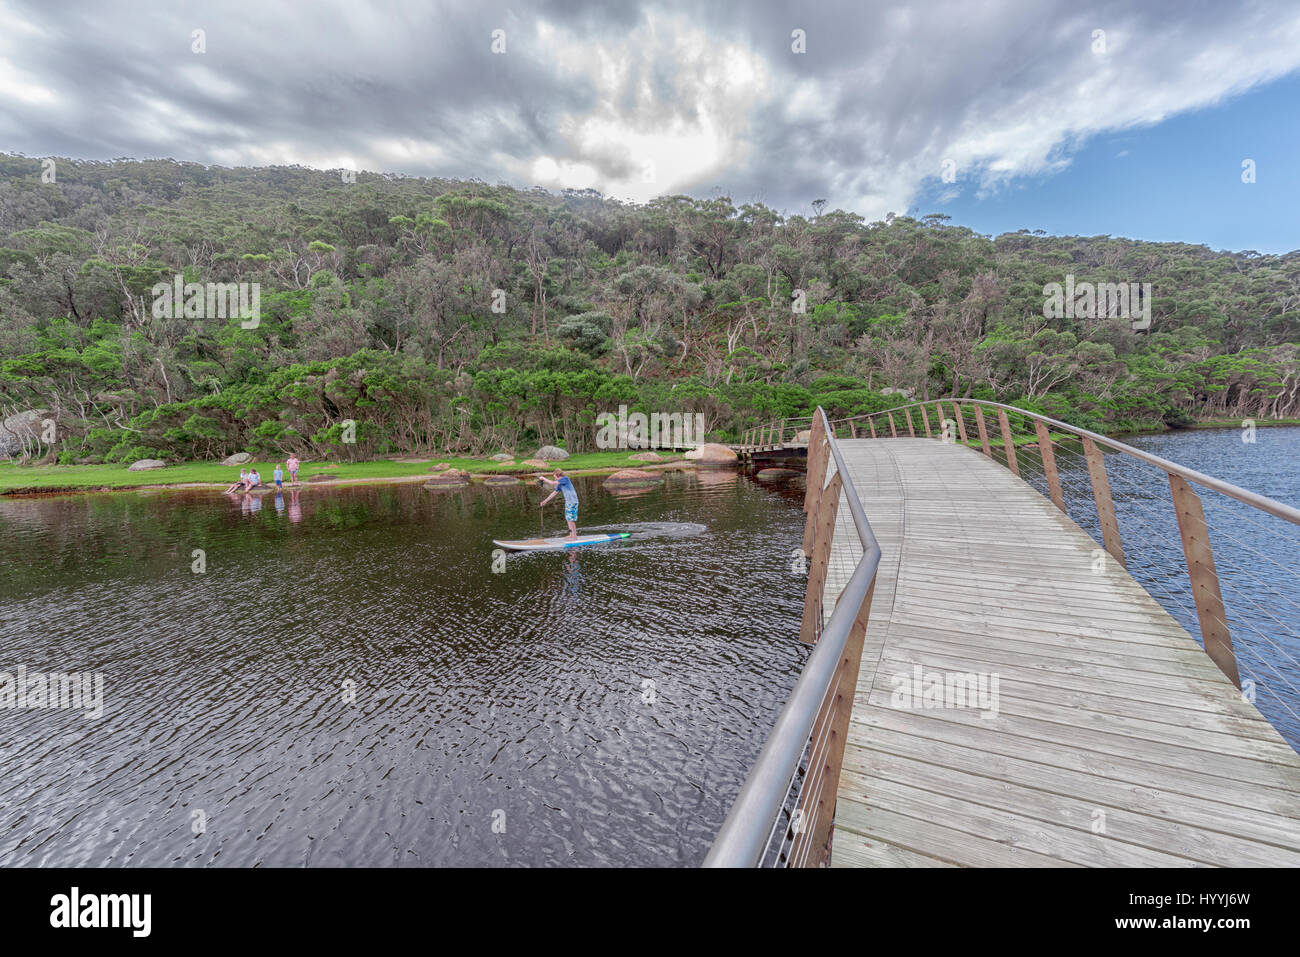 Small bridge leading to a forested area over a river with kids playing on the beach in the distance and a paddle boarder on the river Stock Photo